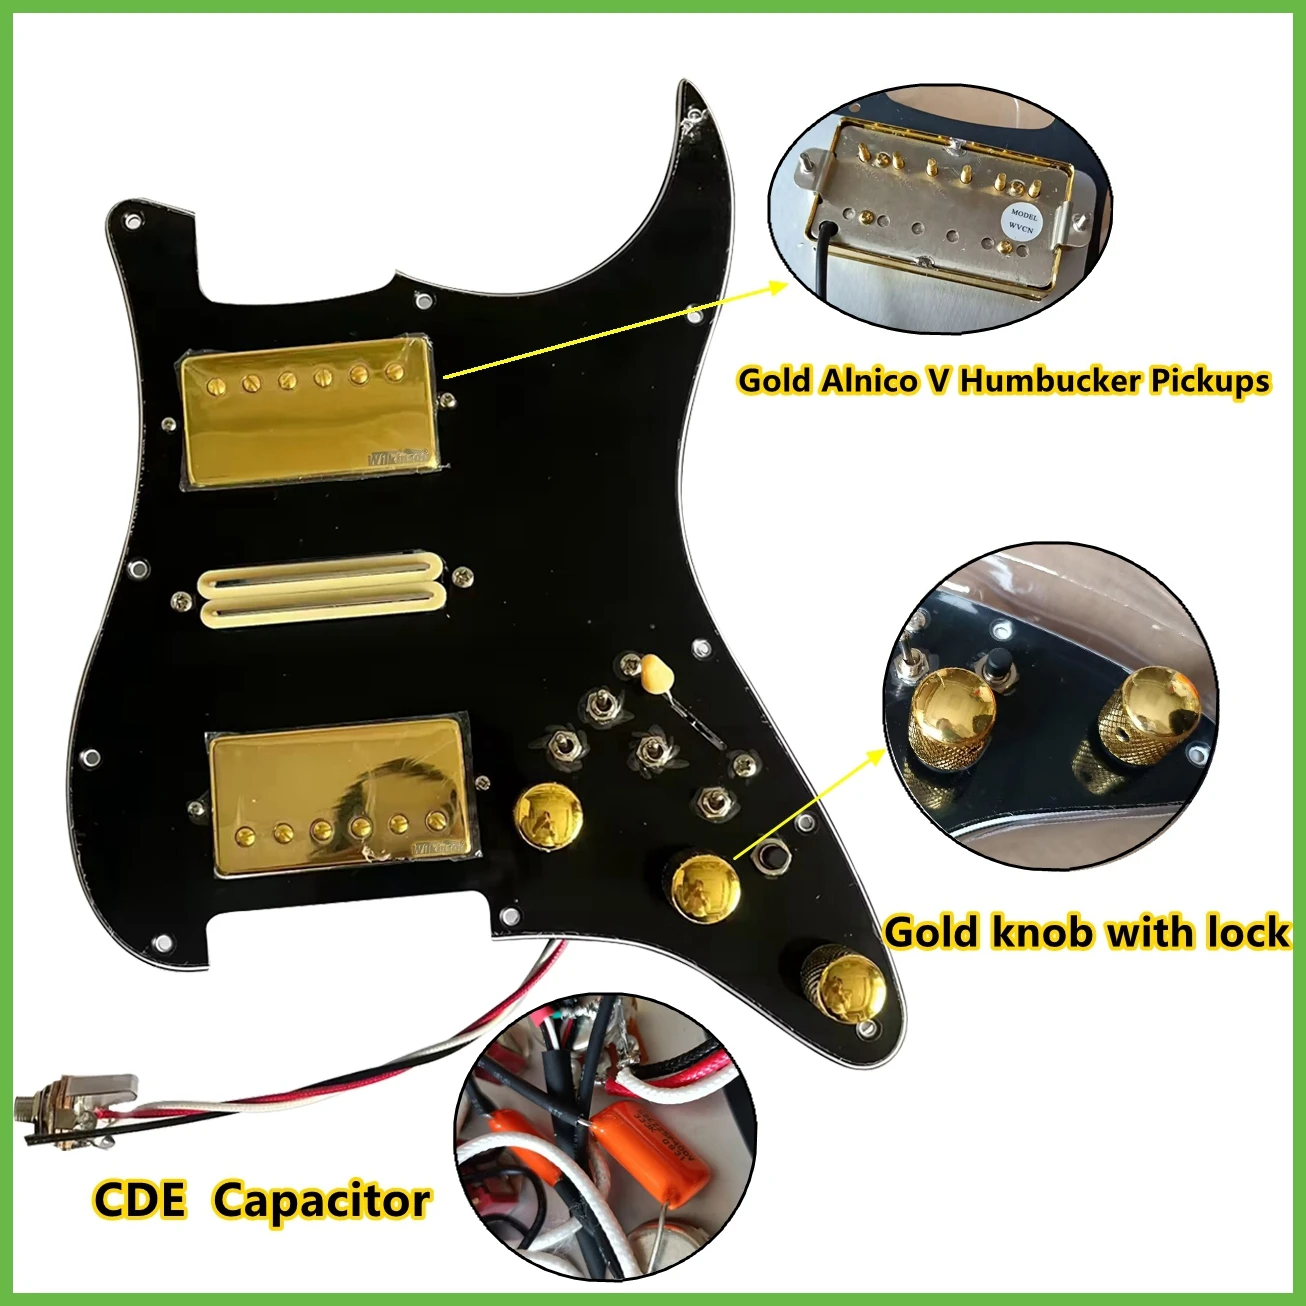 

HSH Upgrade Prewired Pickguard Set Multifunction Toggle Switch Gold Alnico V Pickups High Output DCR Guitar Parts